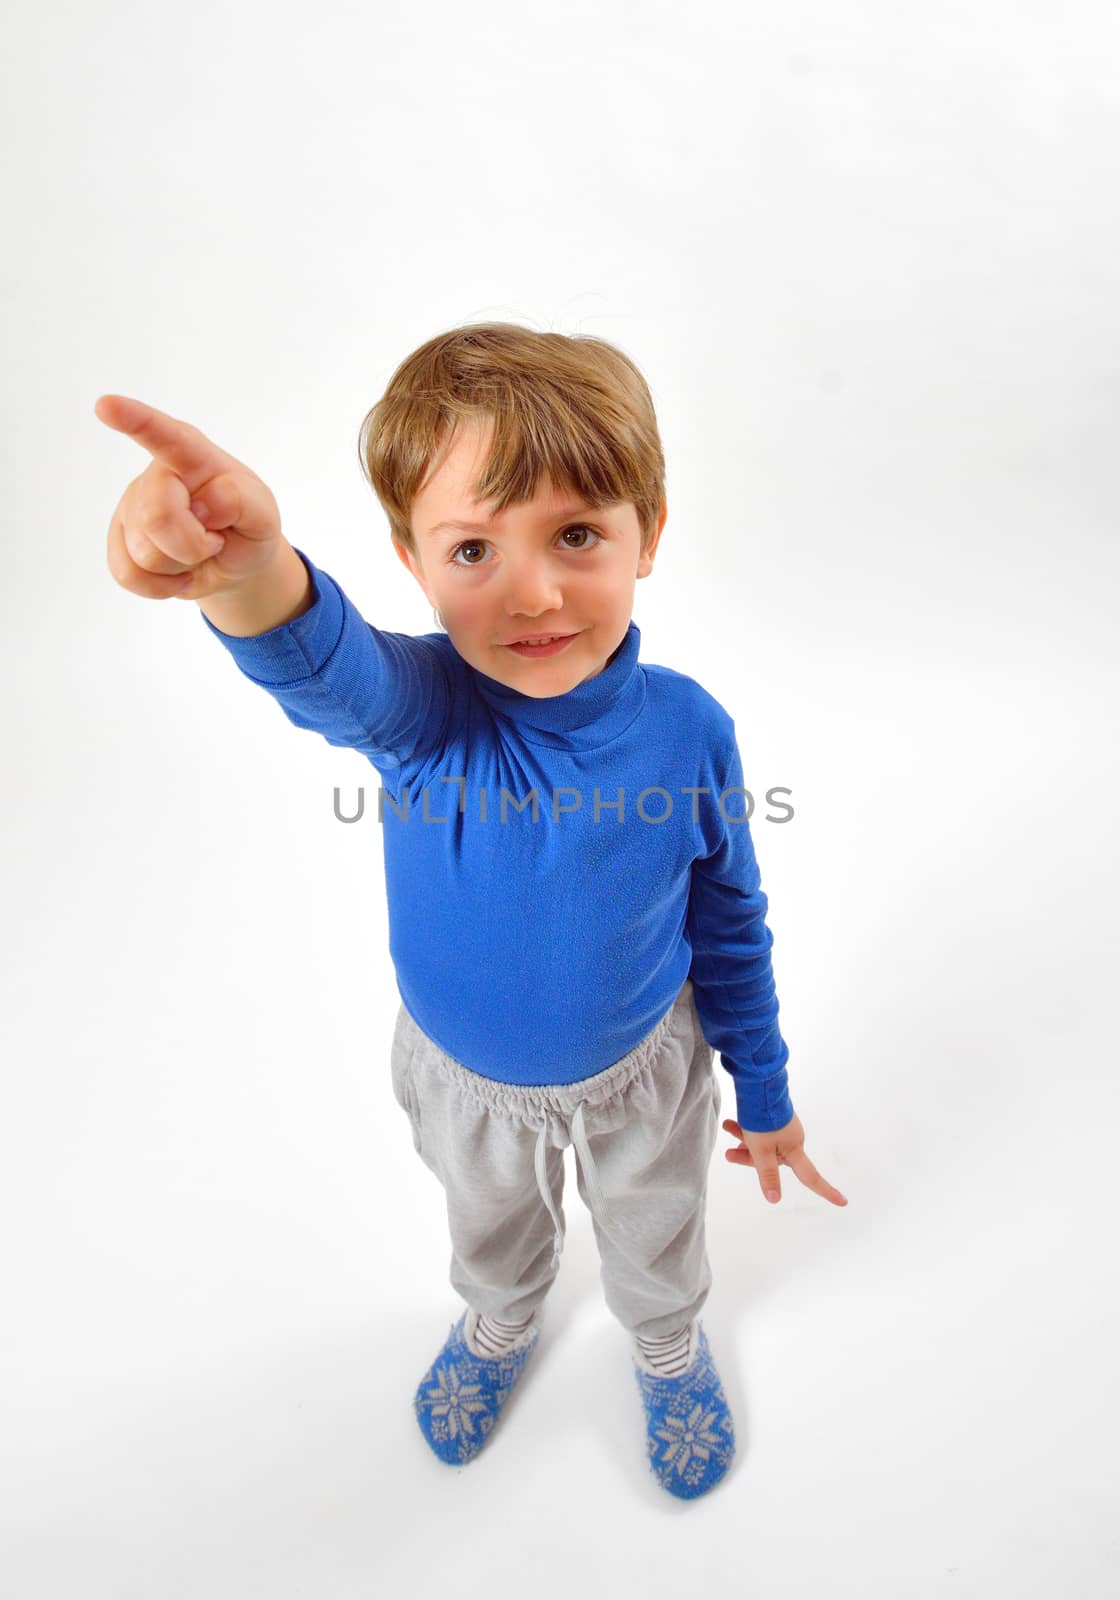 Cheerful little boy pointing up isolated